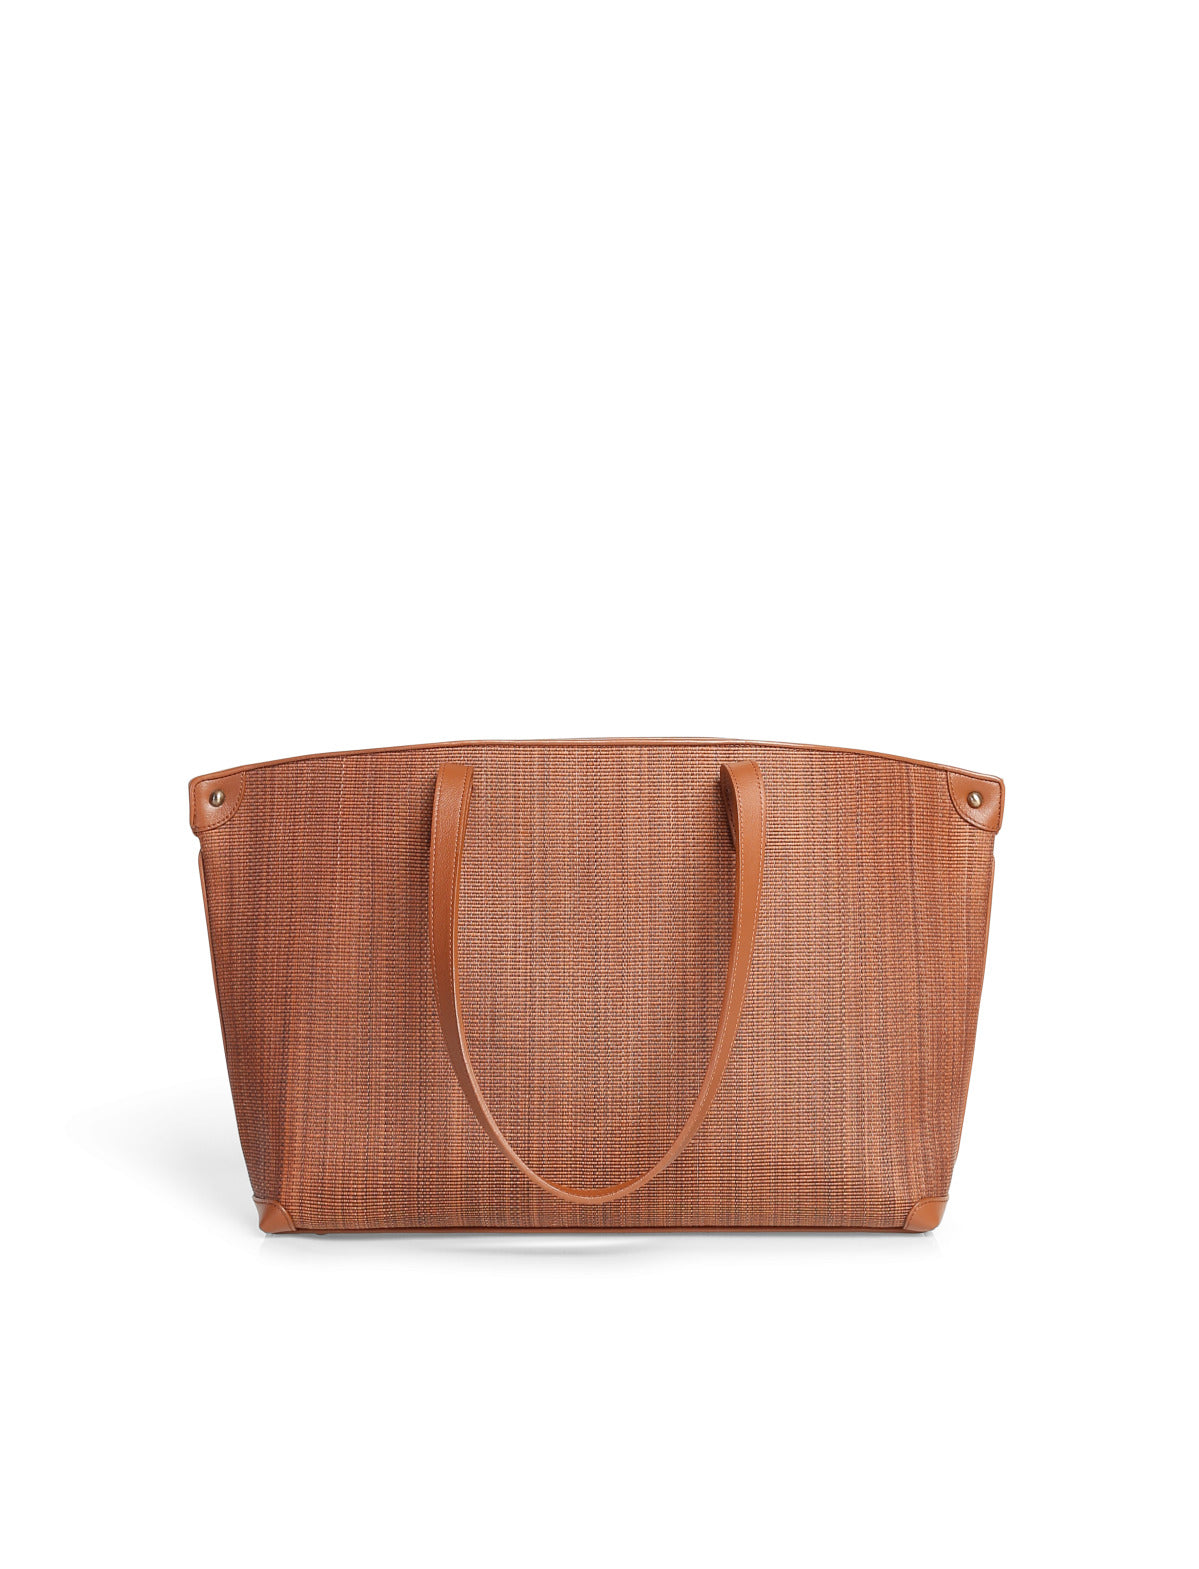 Clare V. Simple Perforated Tote Bag